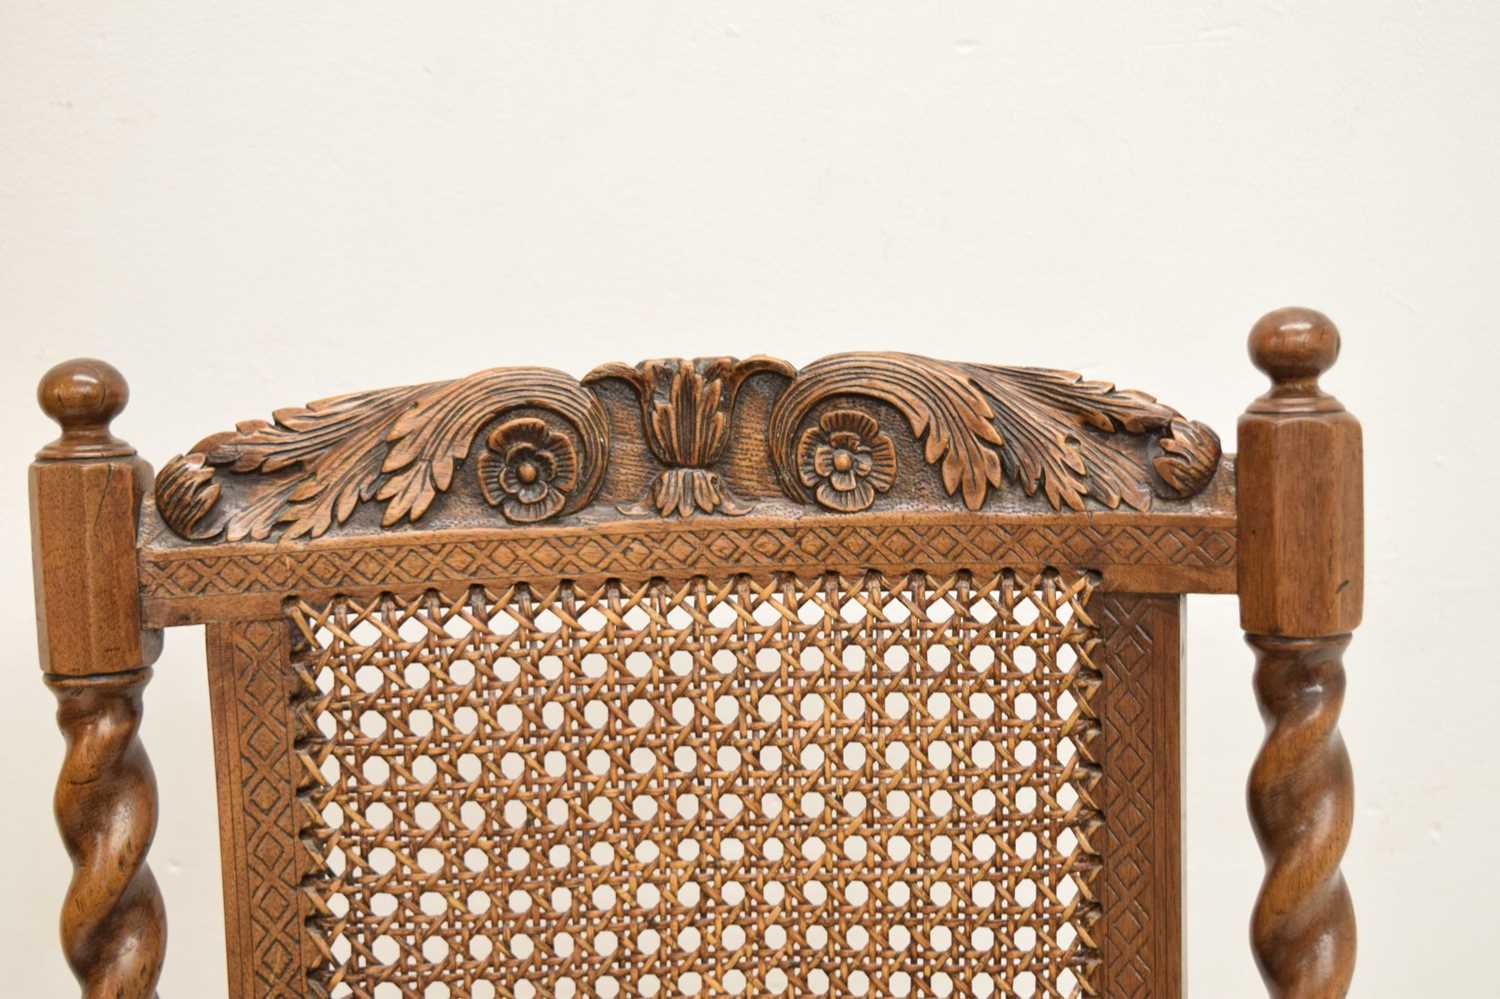 Late 17th century-style cane-seated and backed open armchair - Image 4 of 10